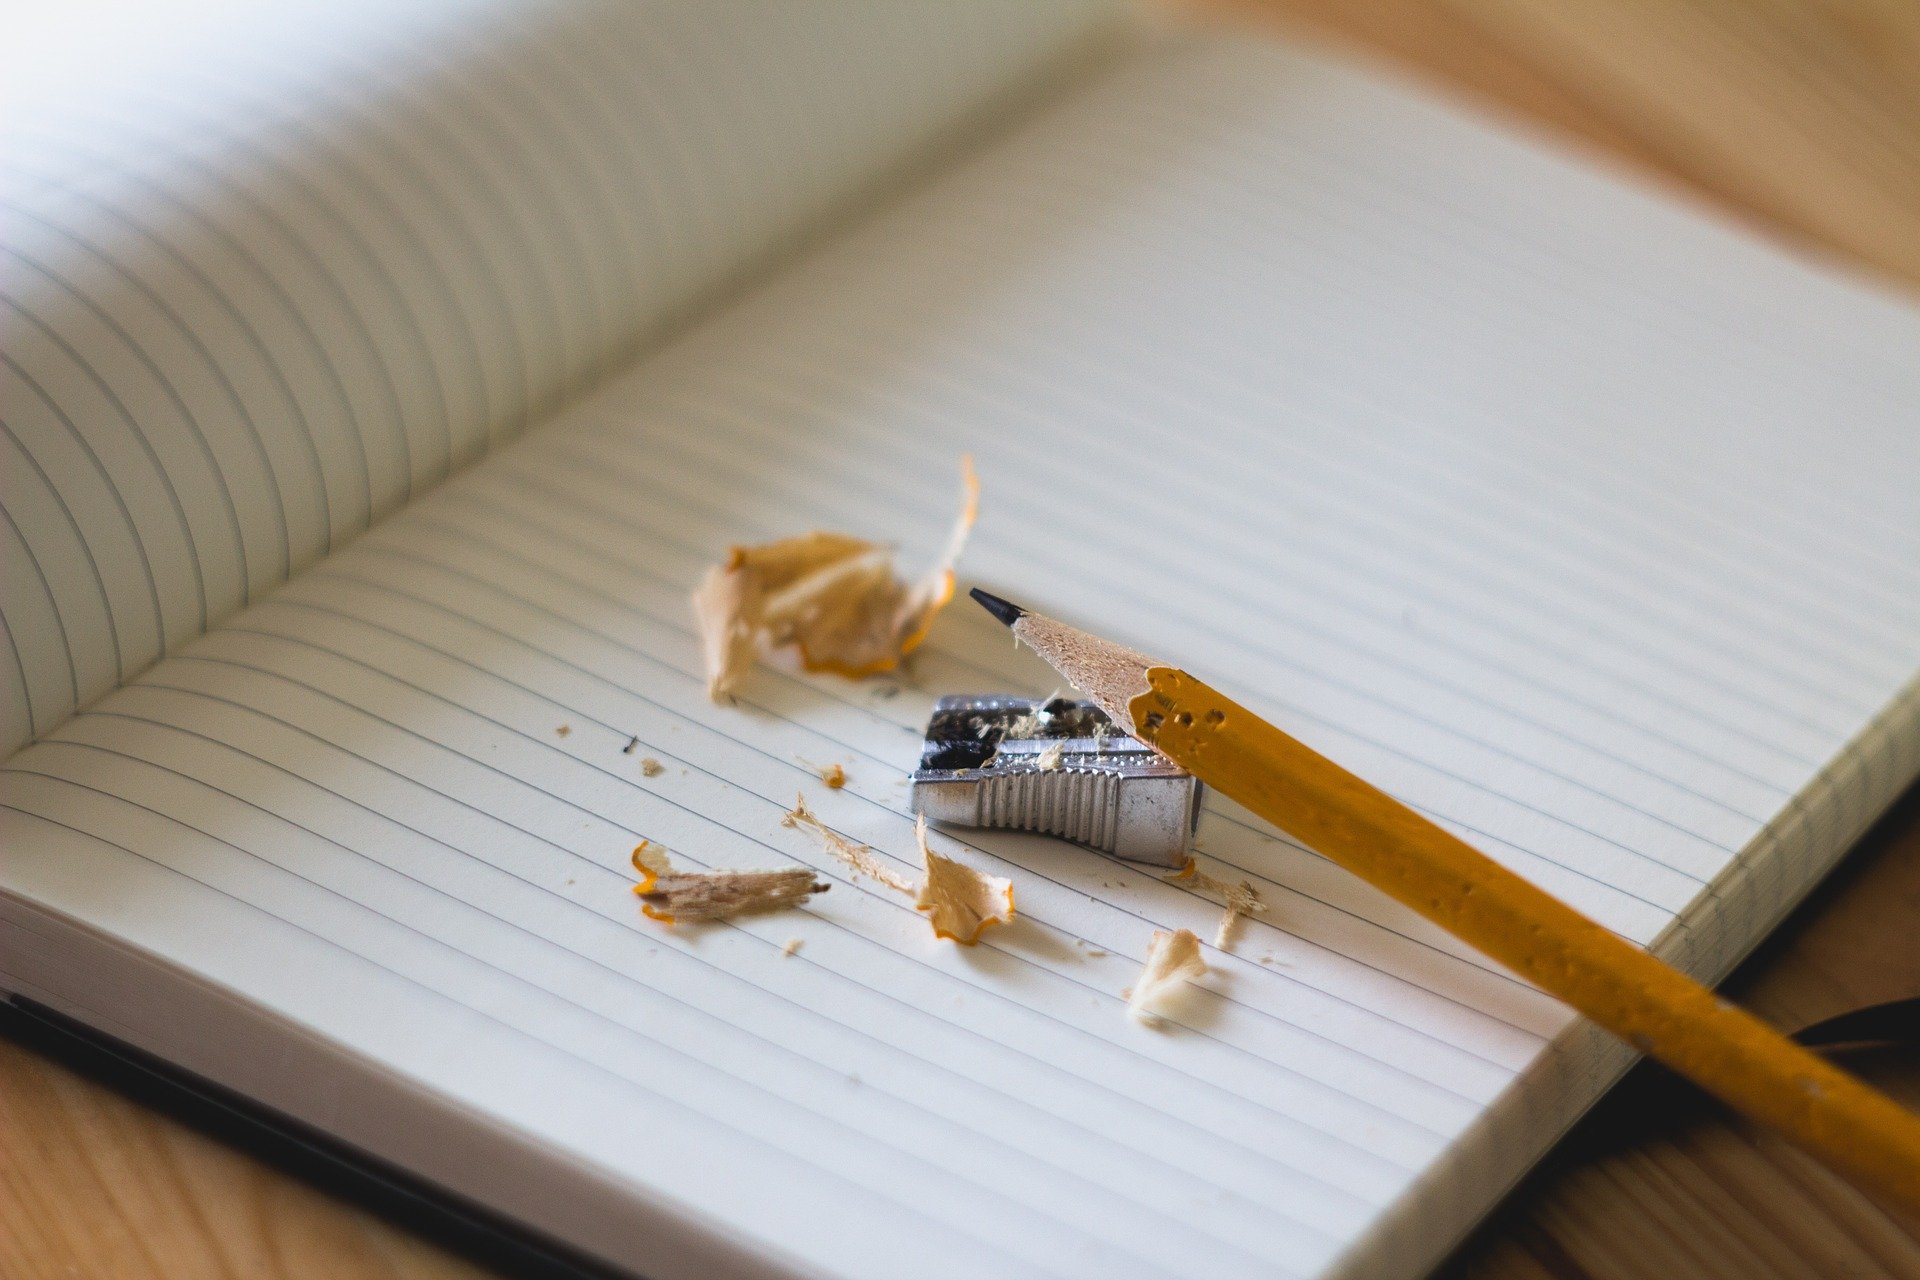 Pencil and sharpener on an open blank notebook. (Photo by Angelina Litvin via Unsplash)